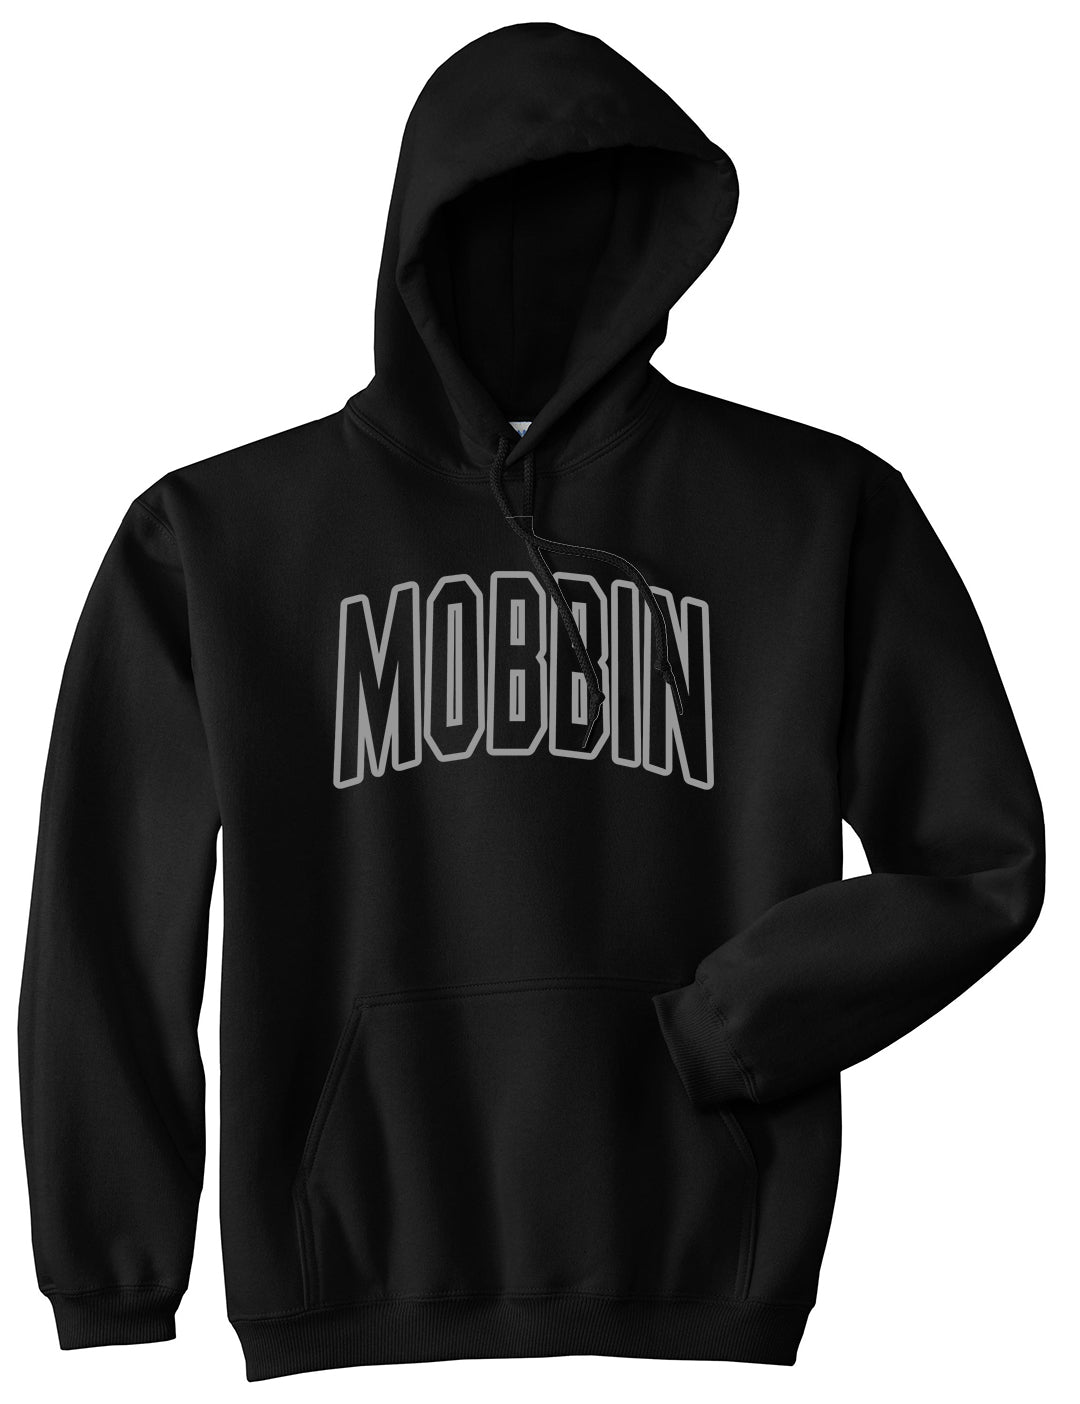 Mobbin Outline Squad Mens Pullover Hoodie Black by Kings Of NY